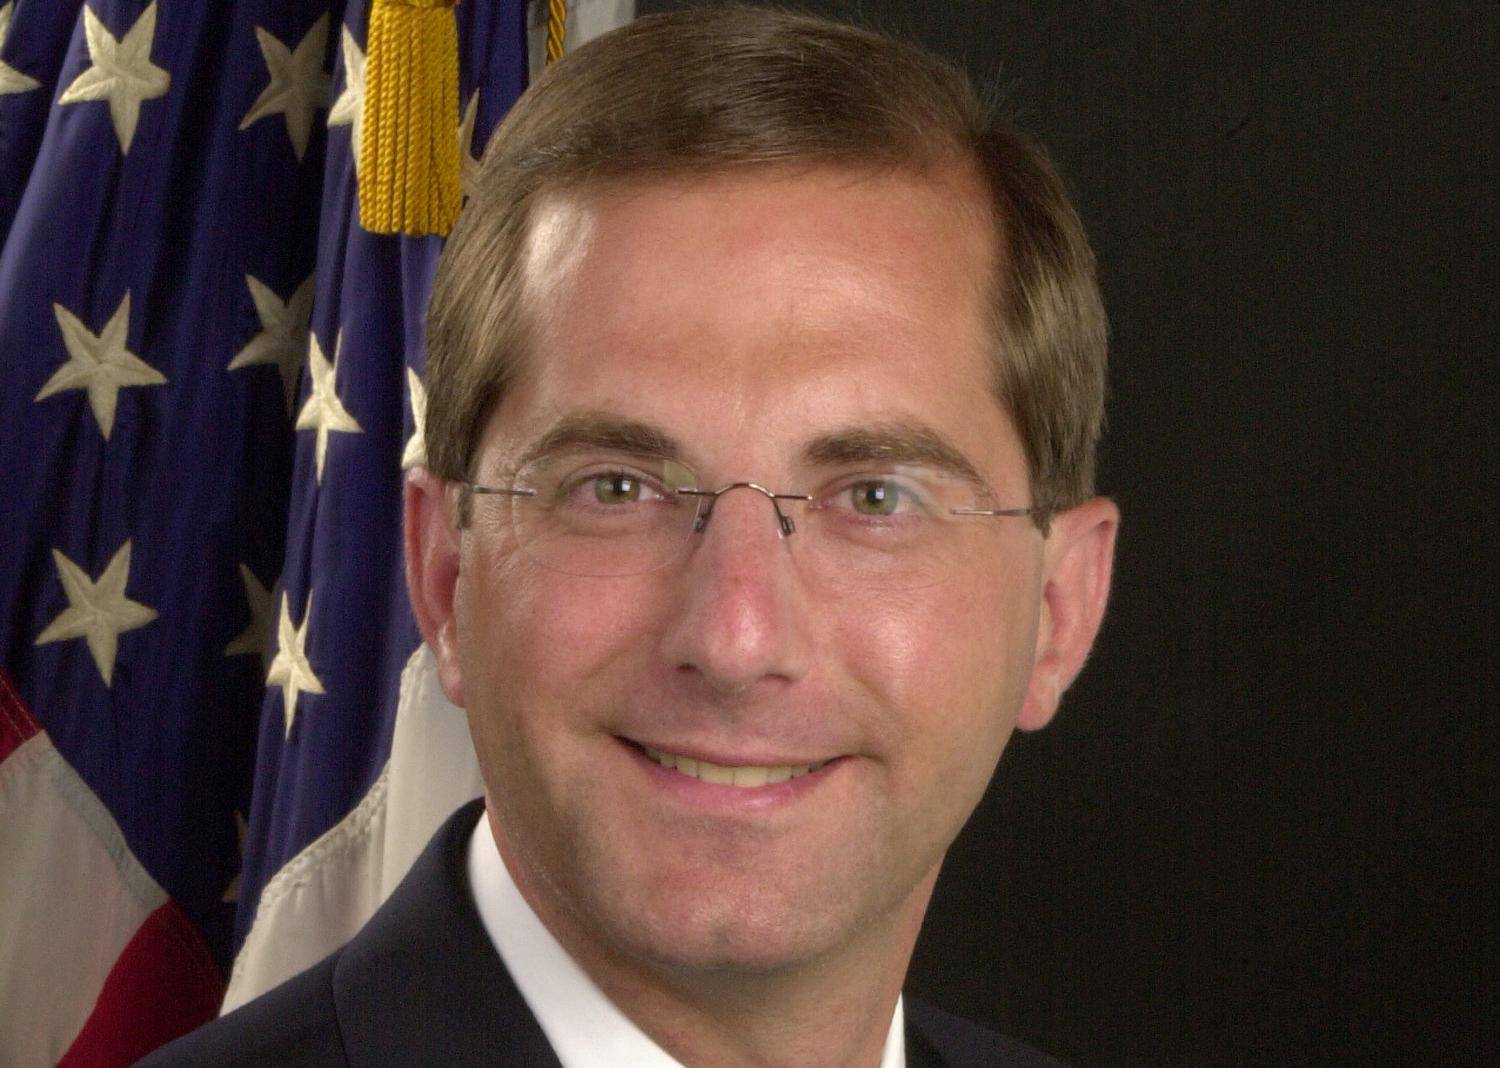 Alex Azar is seen in his official 2005 U.S. Department of Health and Human Services portrait